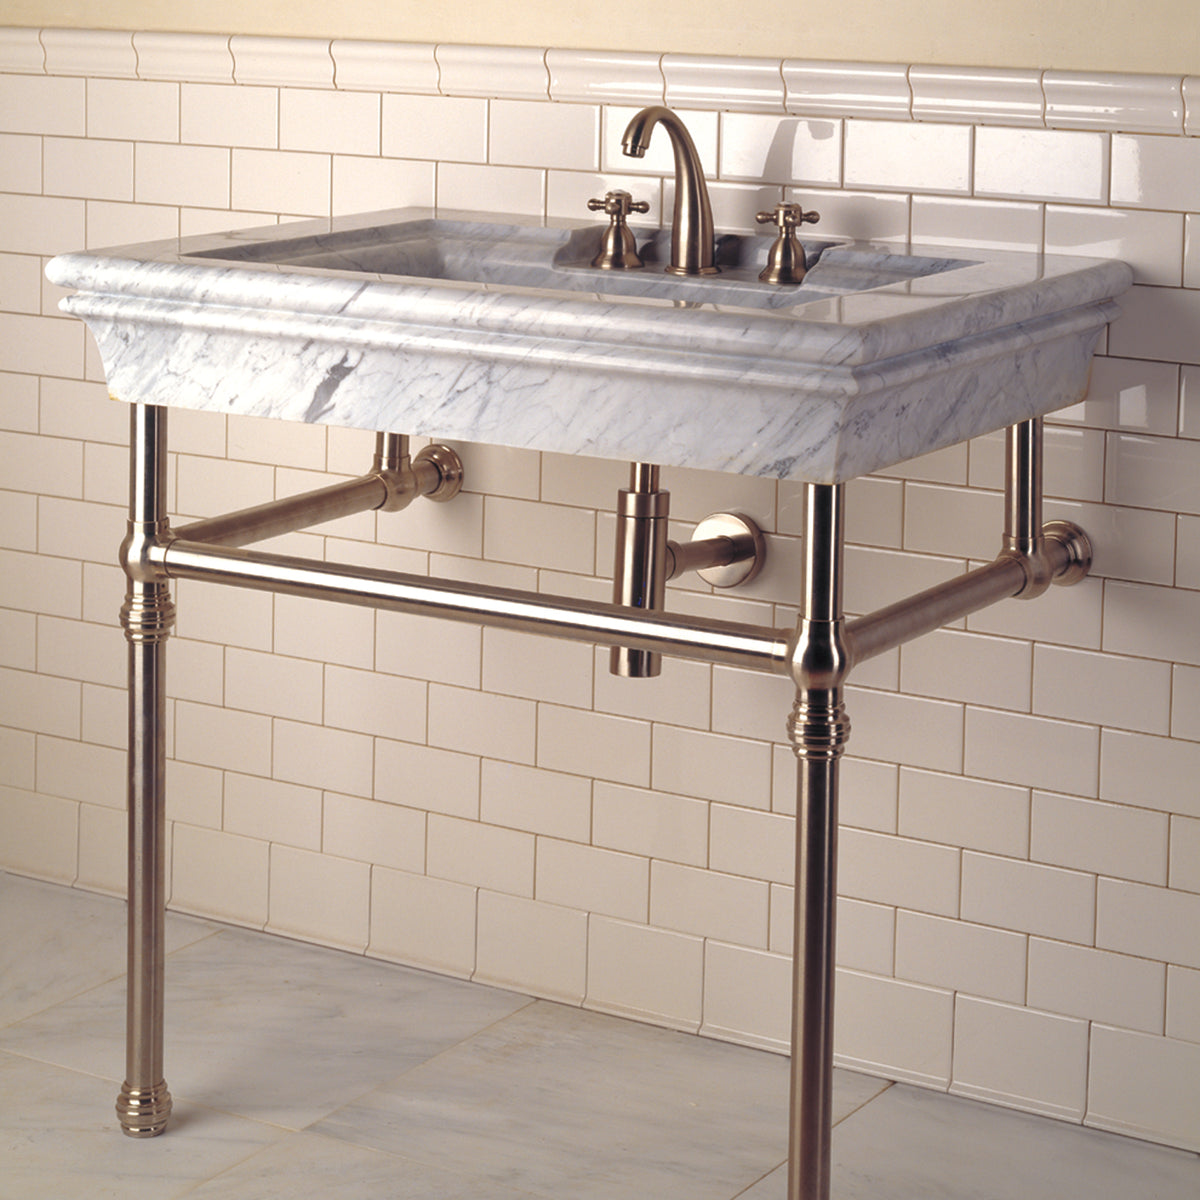 Bordeaux Vanity sink is carved from a solid block of carrara marble with a polished finish.  image 3 of 4